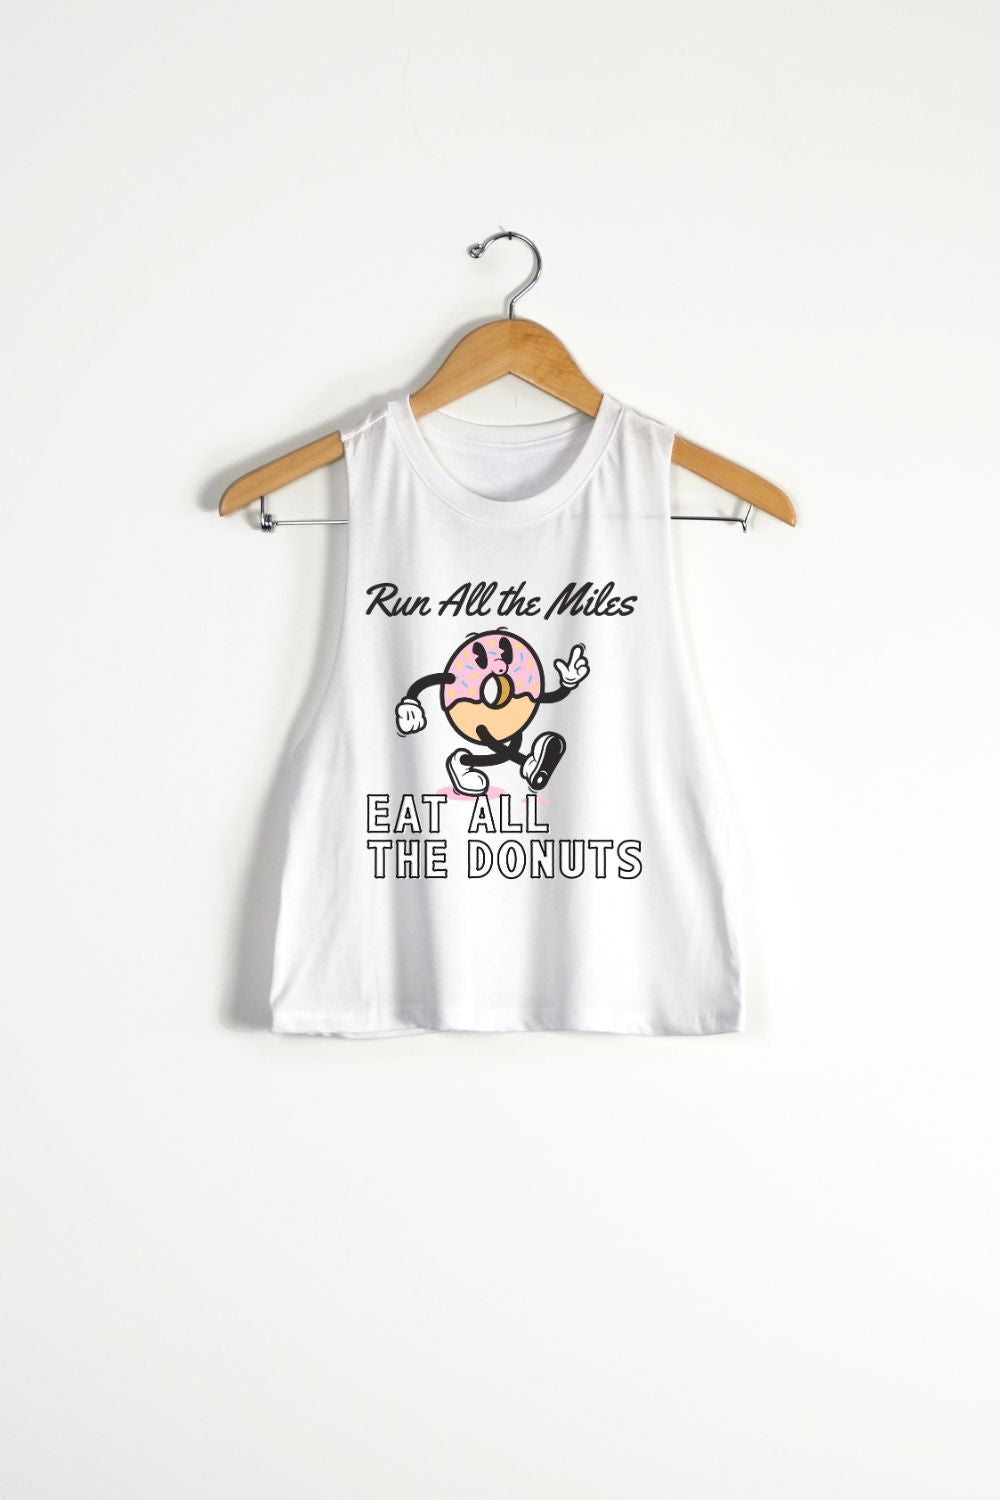 Run All The Miles, Eat All The Donuts Racerback Tank